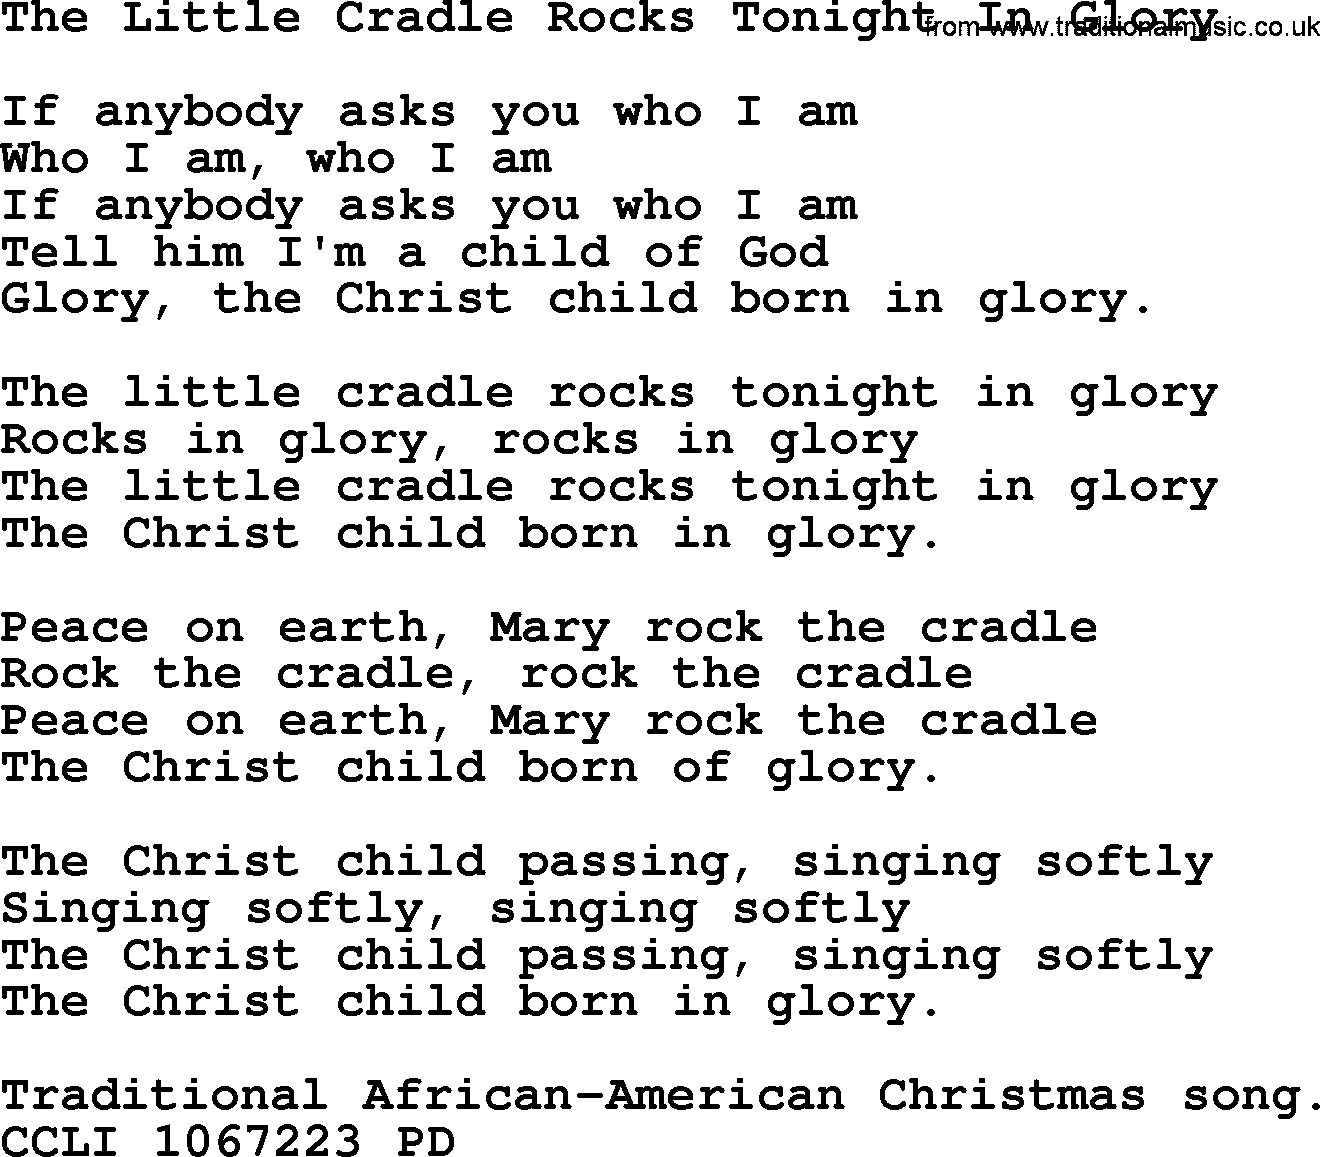 280 Christmas Hymns and songs with PowerPoints and PDF, title: The Little Cradle Rocks Tonight In Glory, lyrics, PPT and PDF